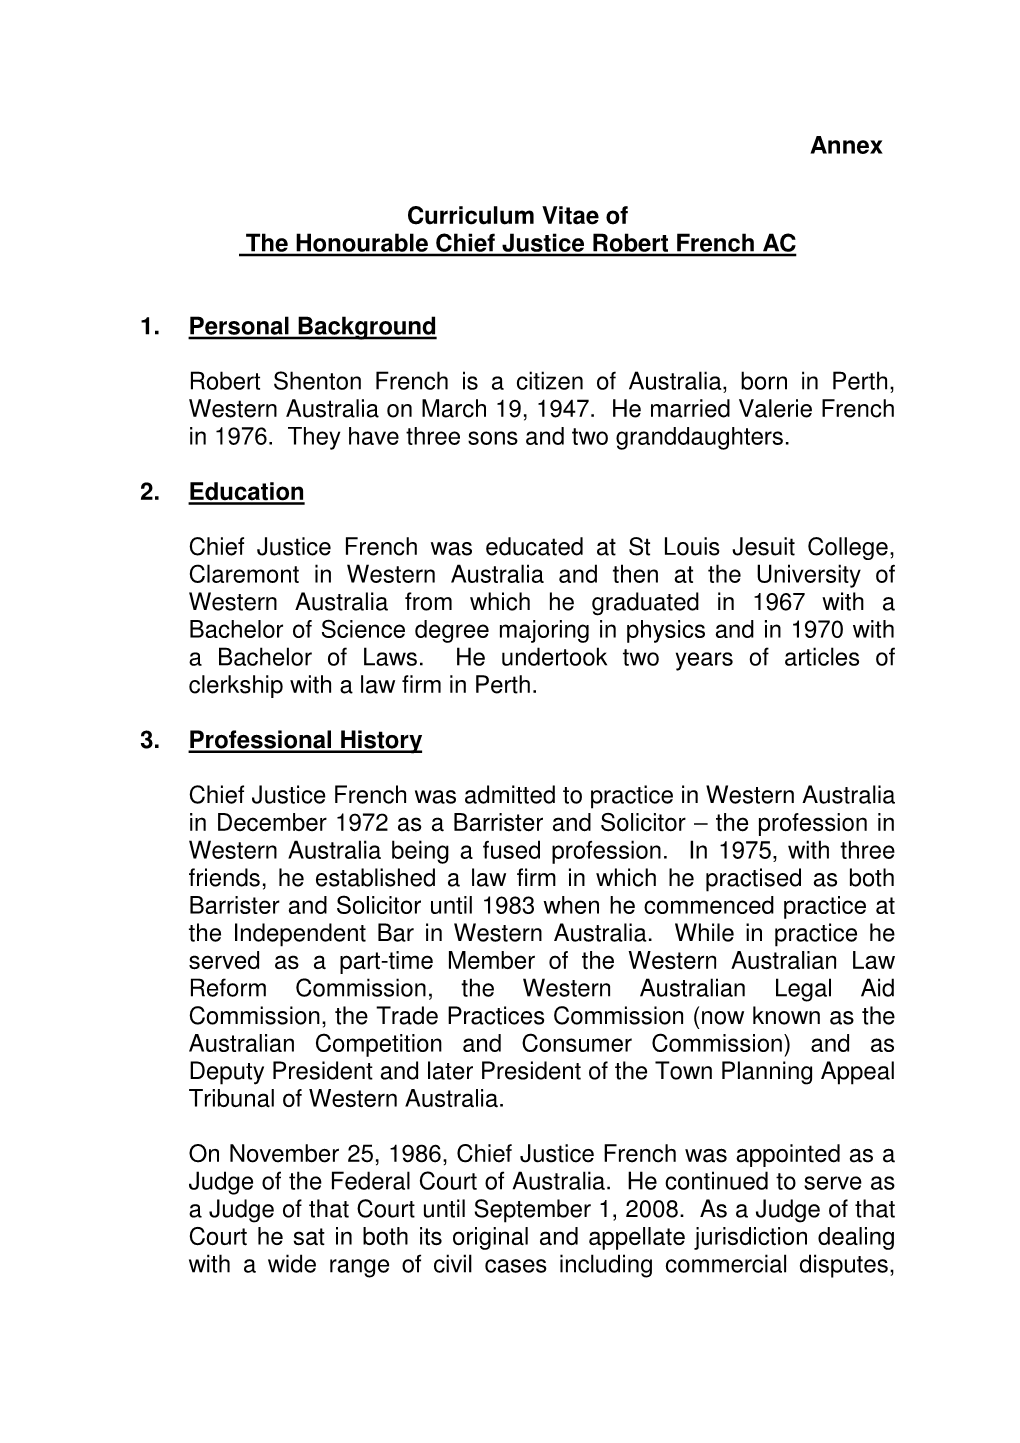 Curriculum Vitae of the Honourable Chief Justice Robert French AC 1